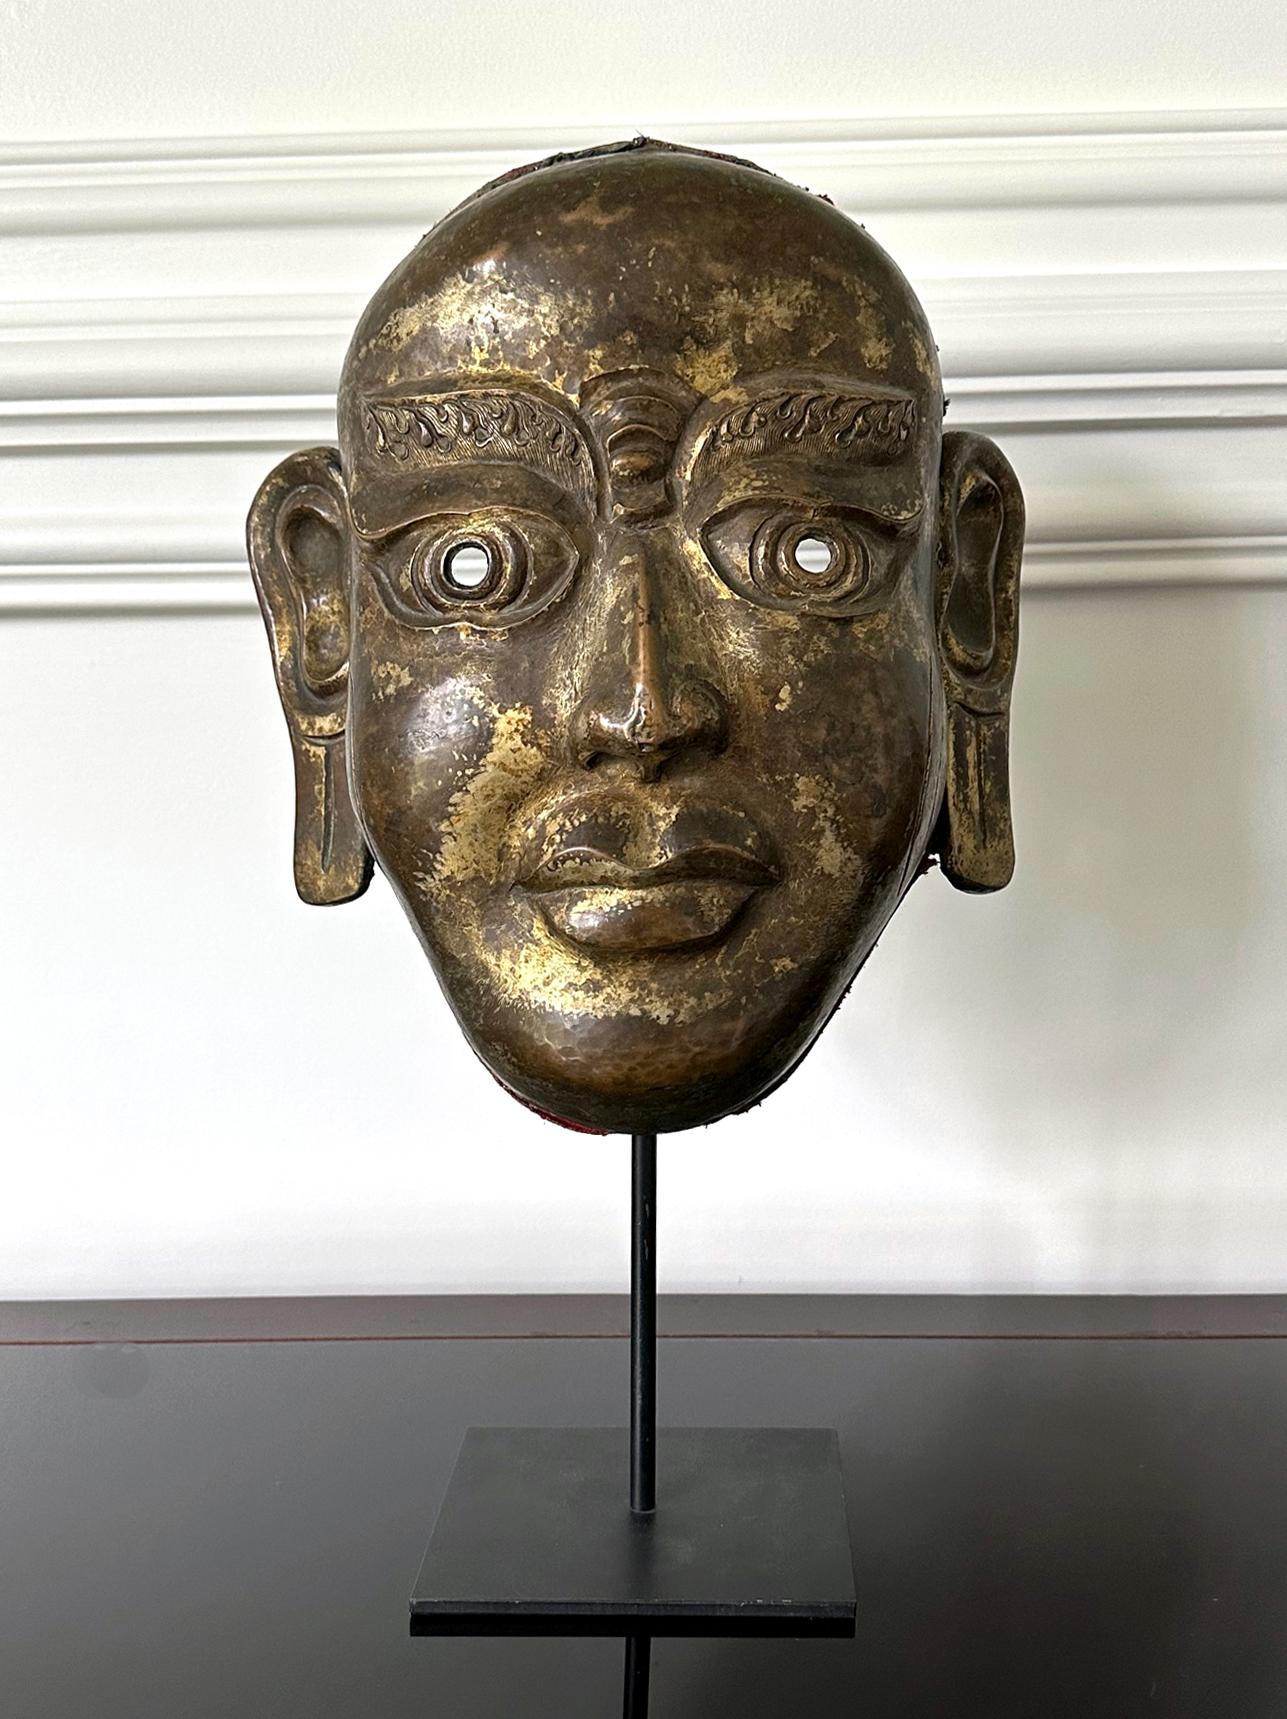 An impressive copper alloy mask of Arhat, the disciple and follower of Buddha (also known as Luohan in Chinese) from Tibetan region circa 19th century. The larger-than-life mask has striking iconic facial features: large, rounded eyes under bushy